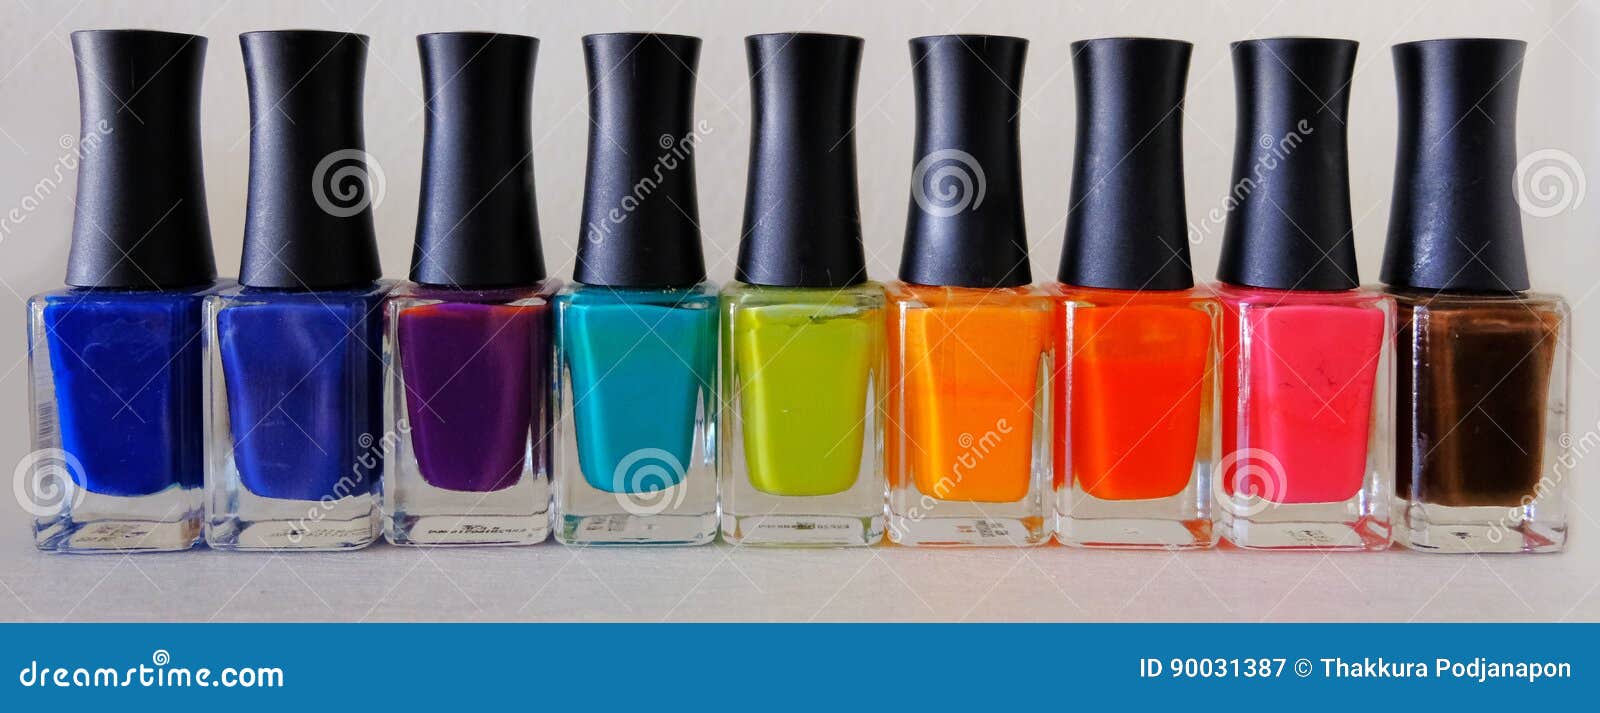 Colorful Nail Polish Collection - wide 6